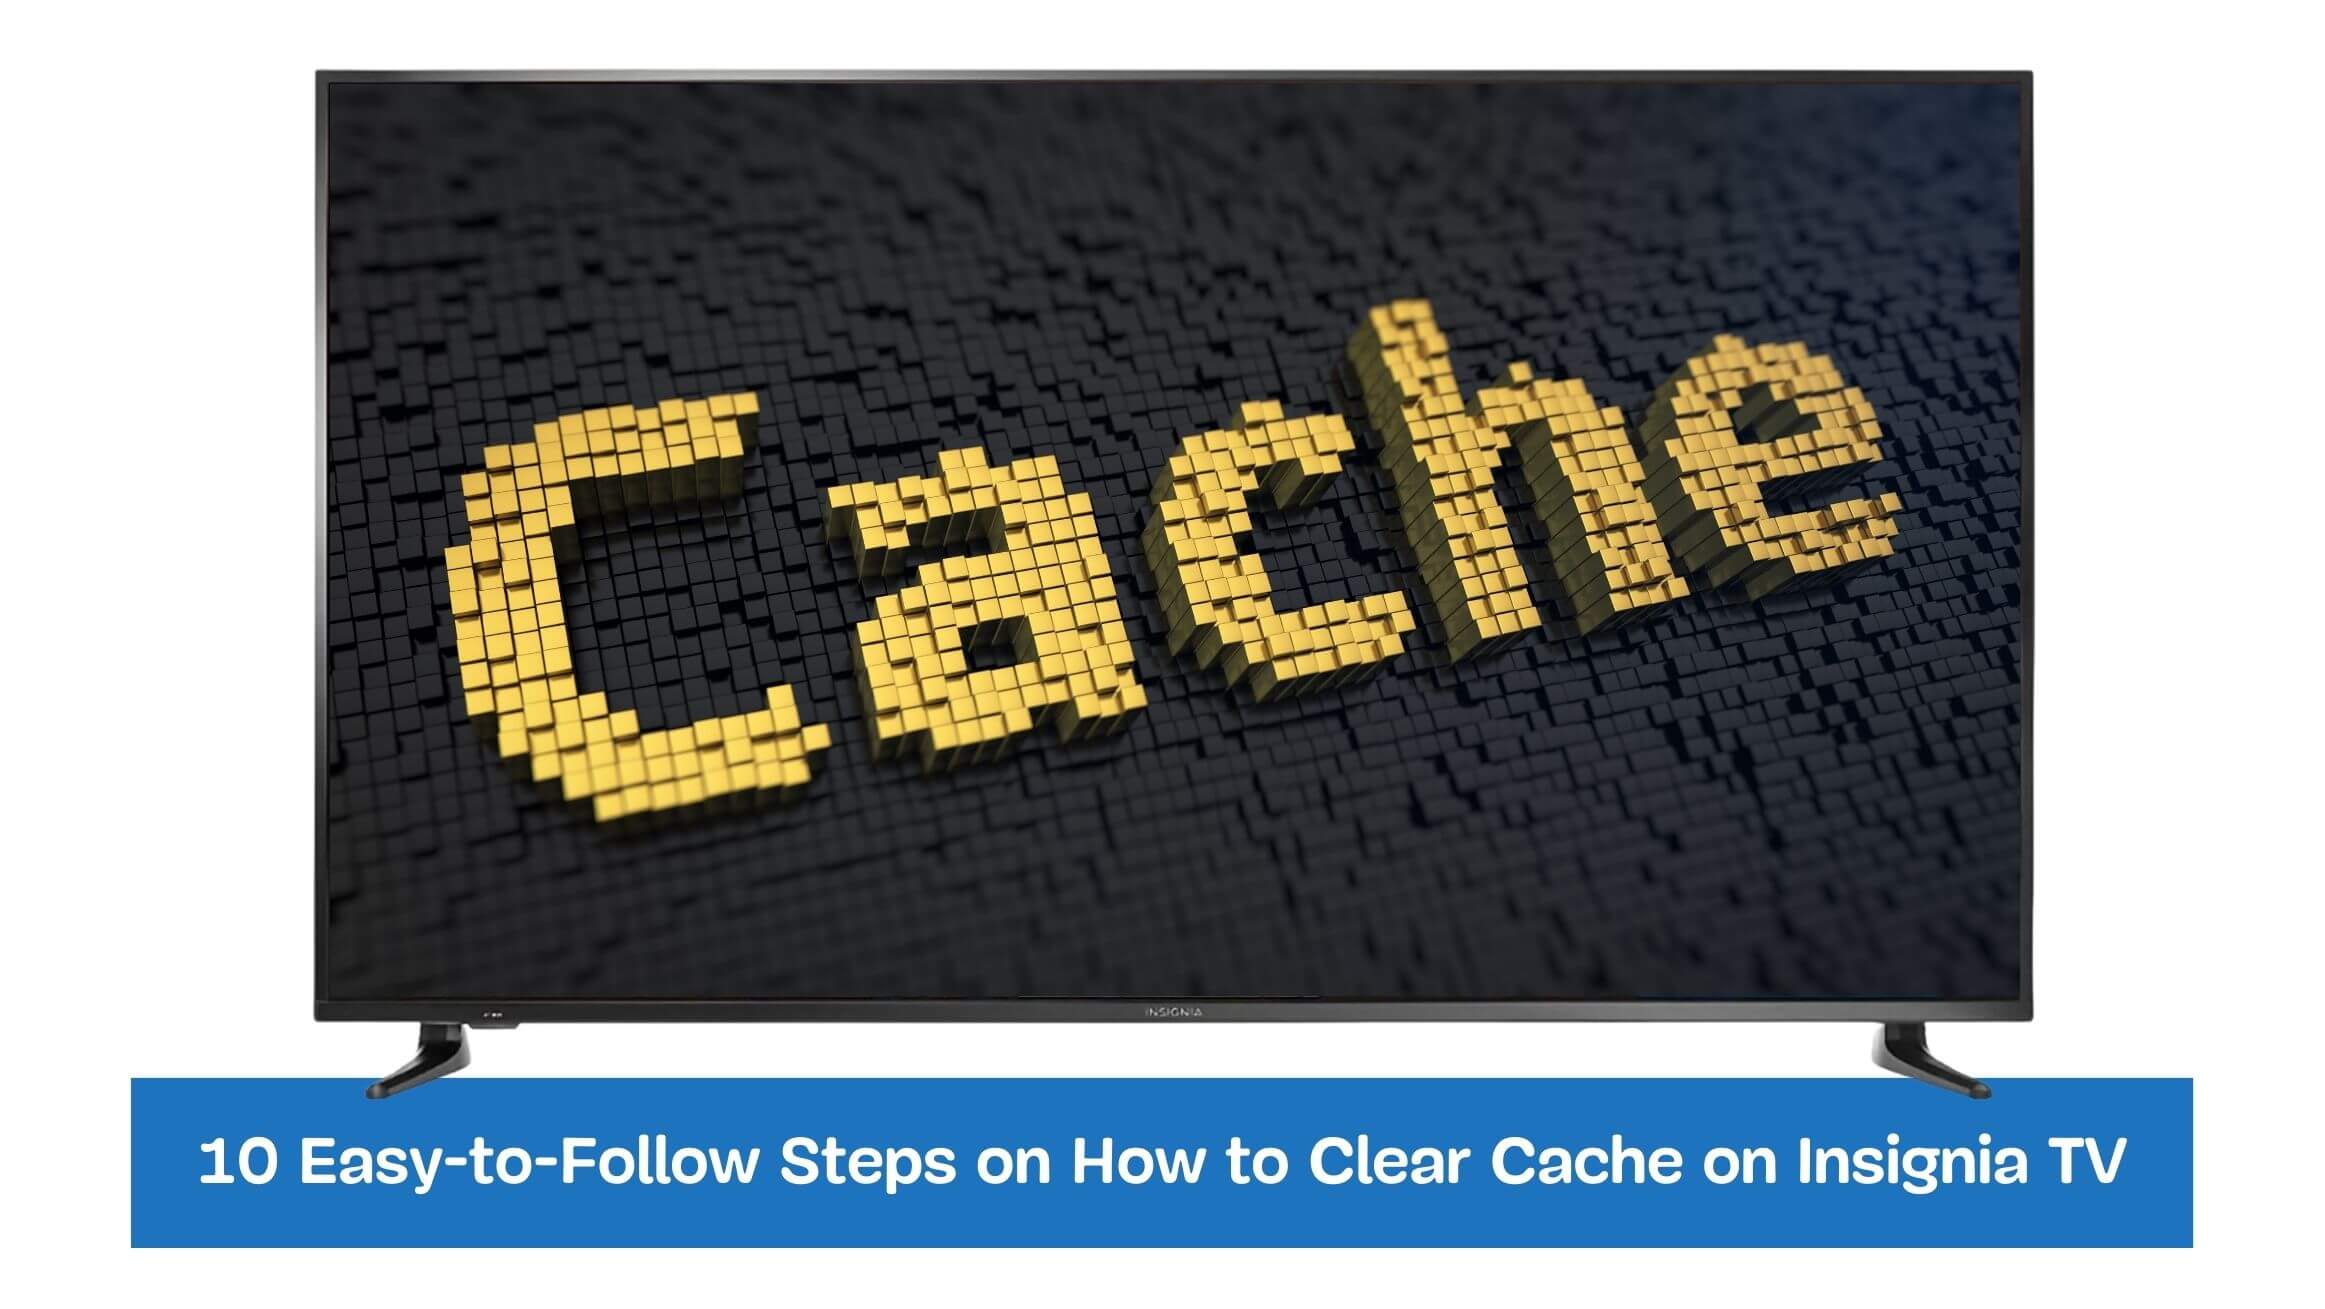 10 Easy-to-Follow Steps on How to Clear Cache on Insignia TV